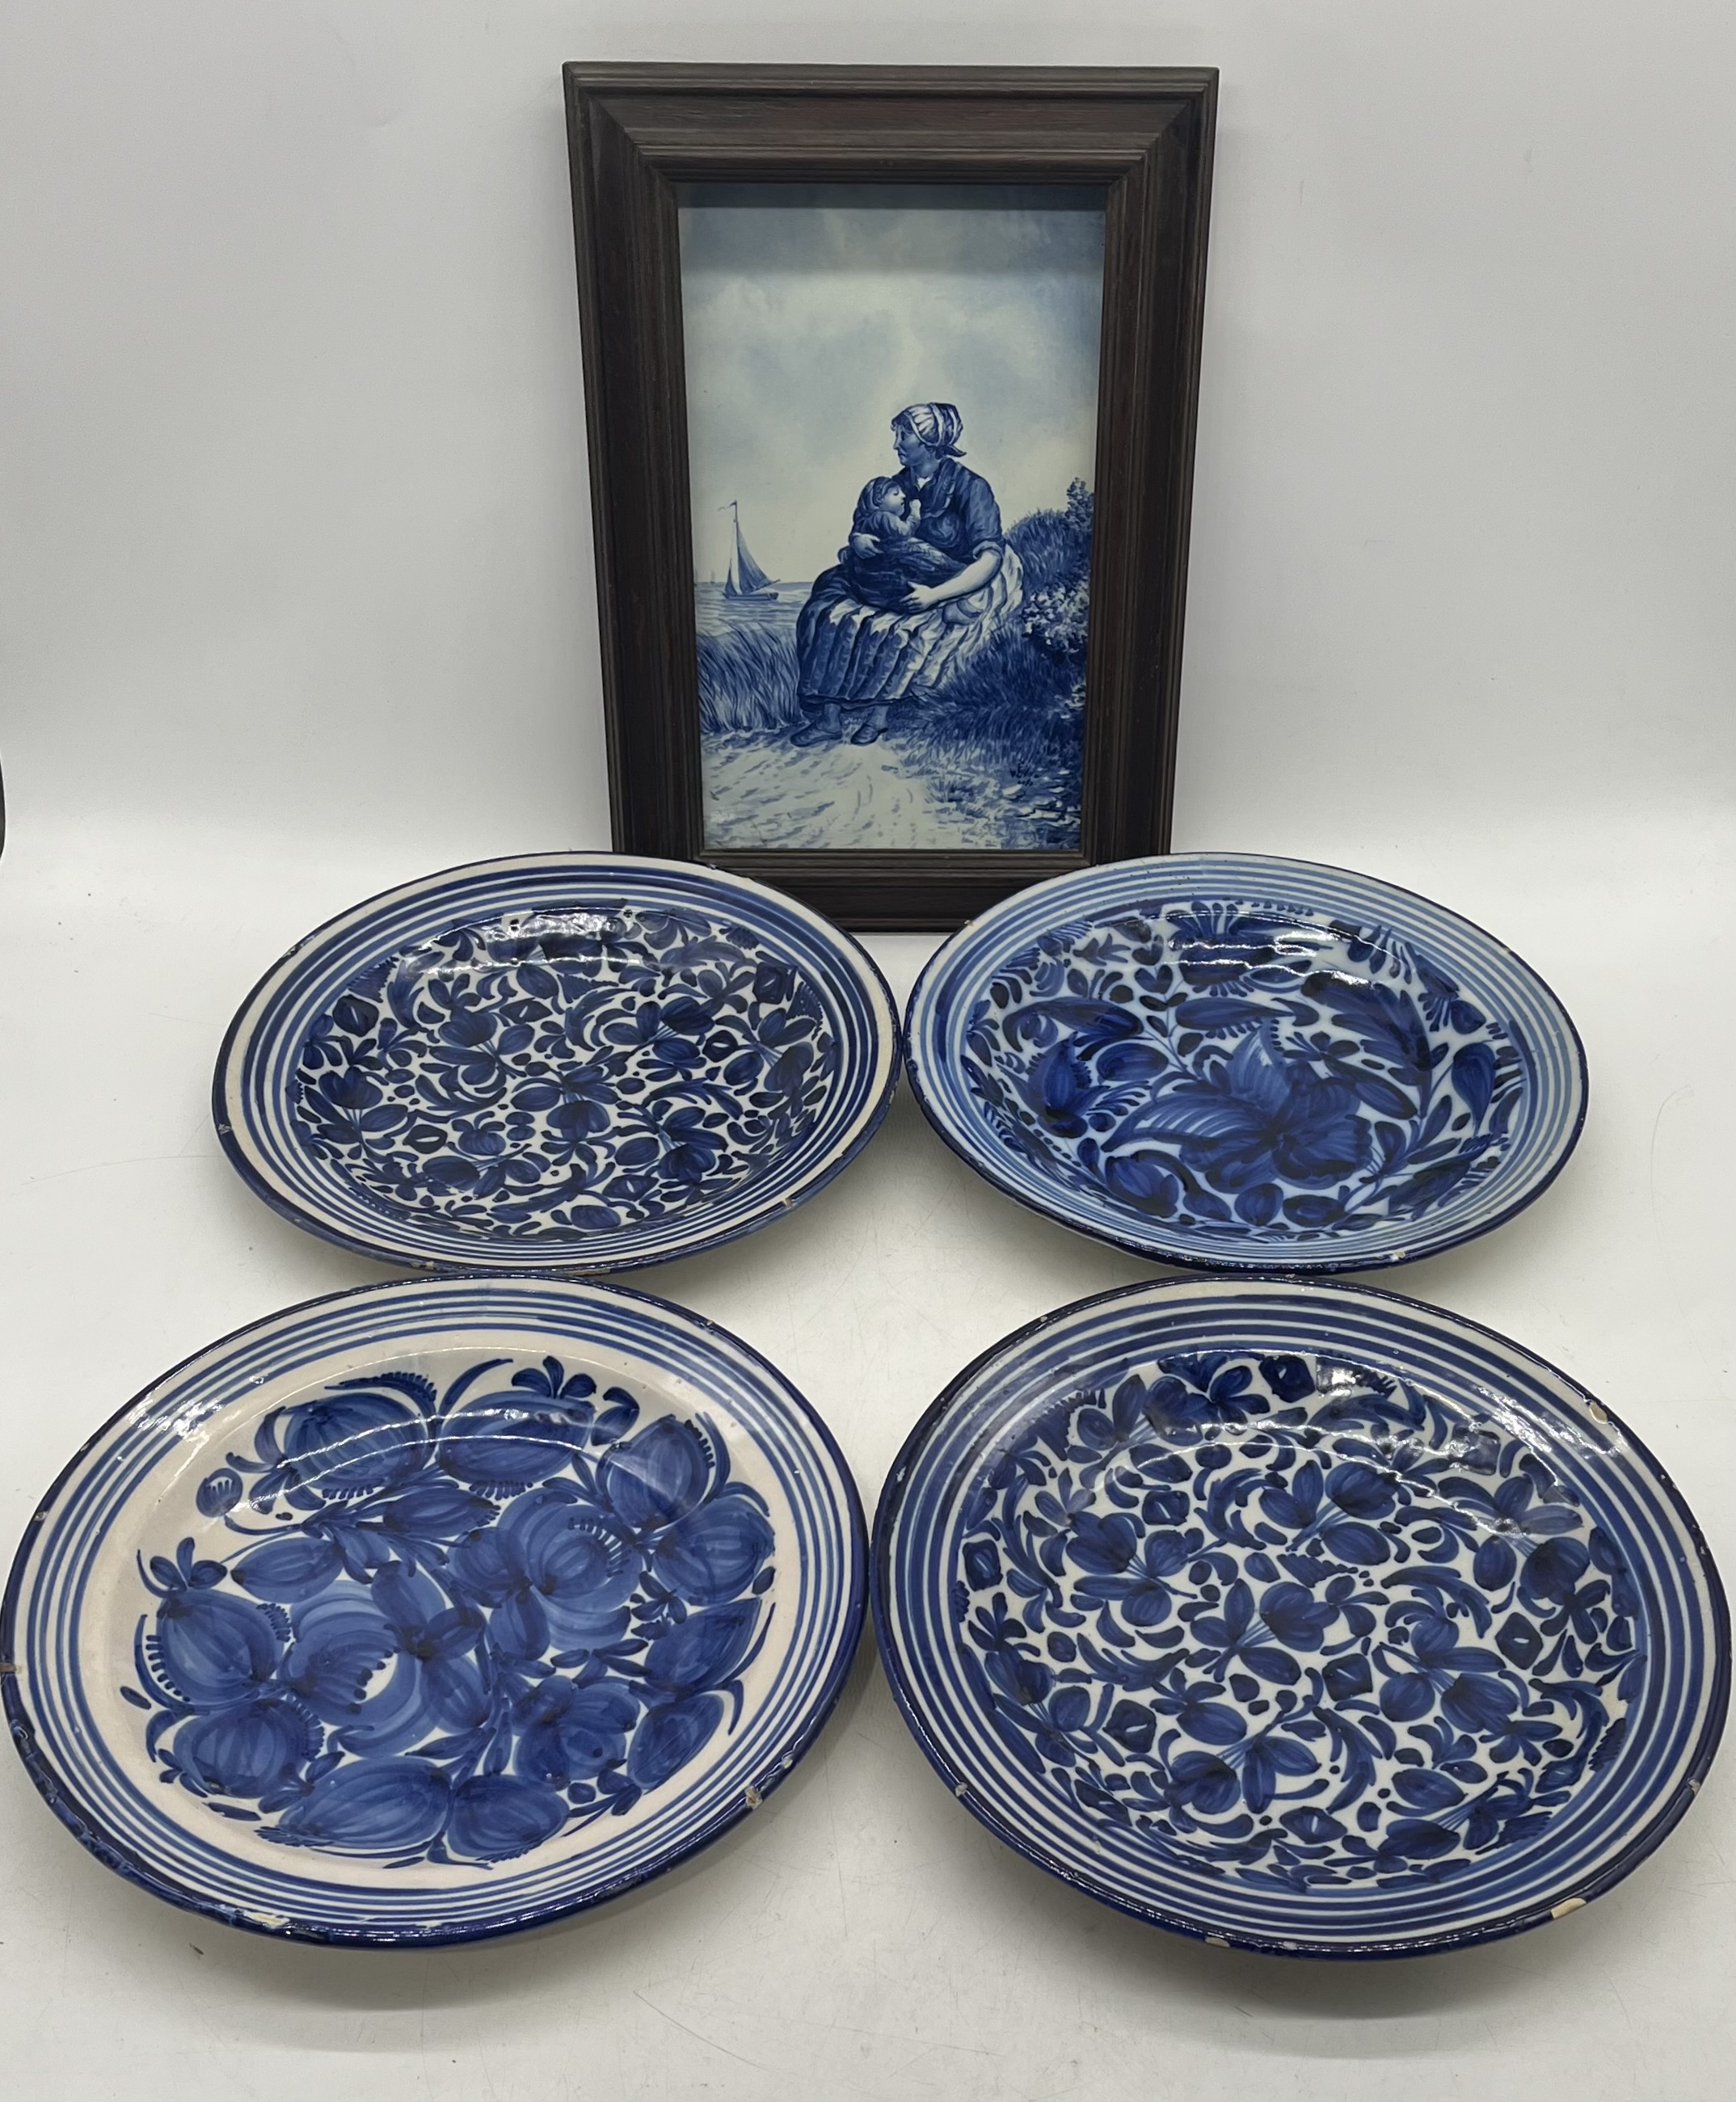 A Delft plaque (frame in need of attention) along with four blue and white chargers (some chips to